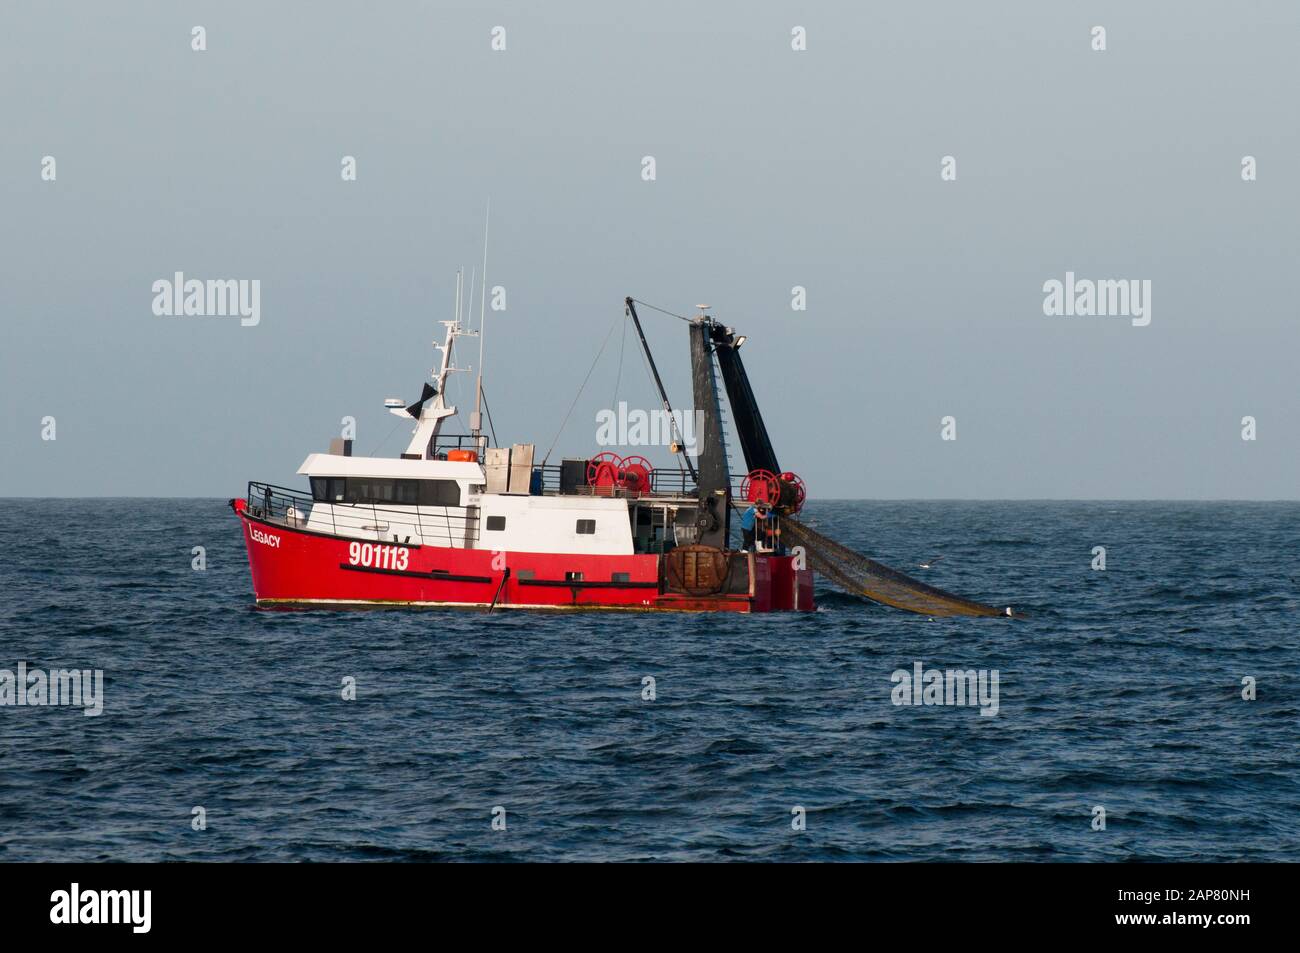 Fishing trawler off Kaikoura, South Island, New Zealand. Kaikoura Canyon's deep waters favour whales, dolphins and other marine mammals. Stock Photo